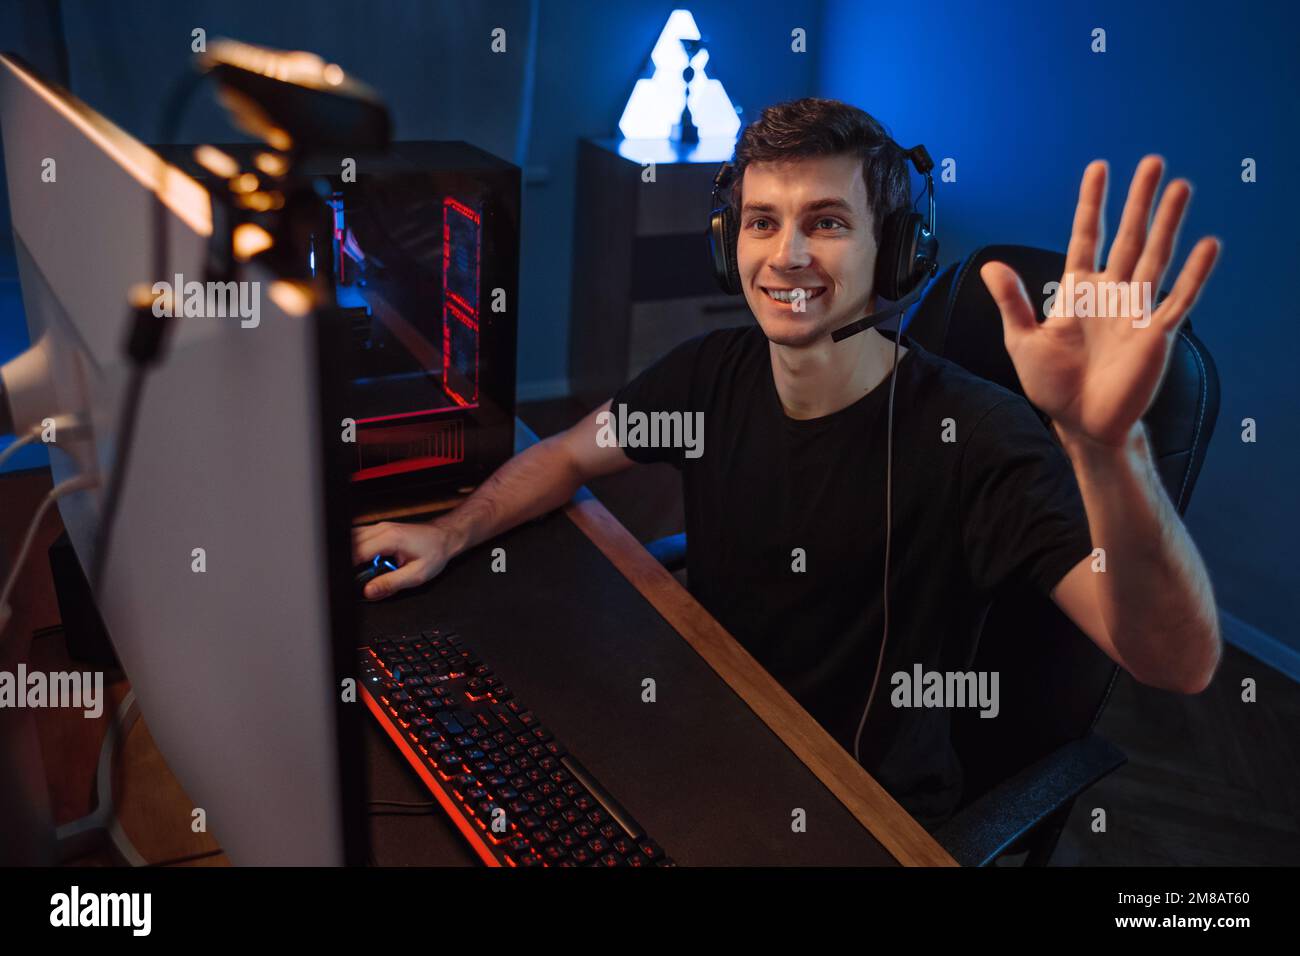 Professional cyber gamer having live stream, waving hand to followers and subscribers of his internet channel,